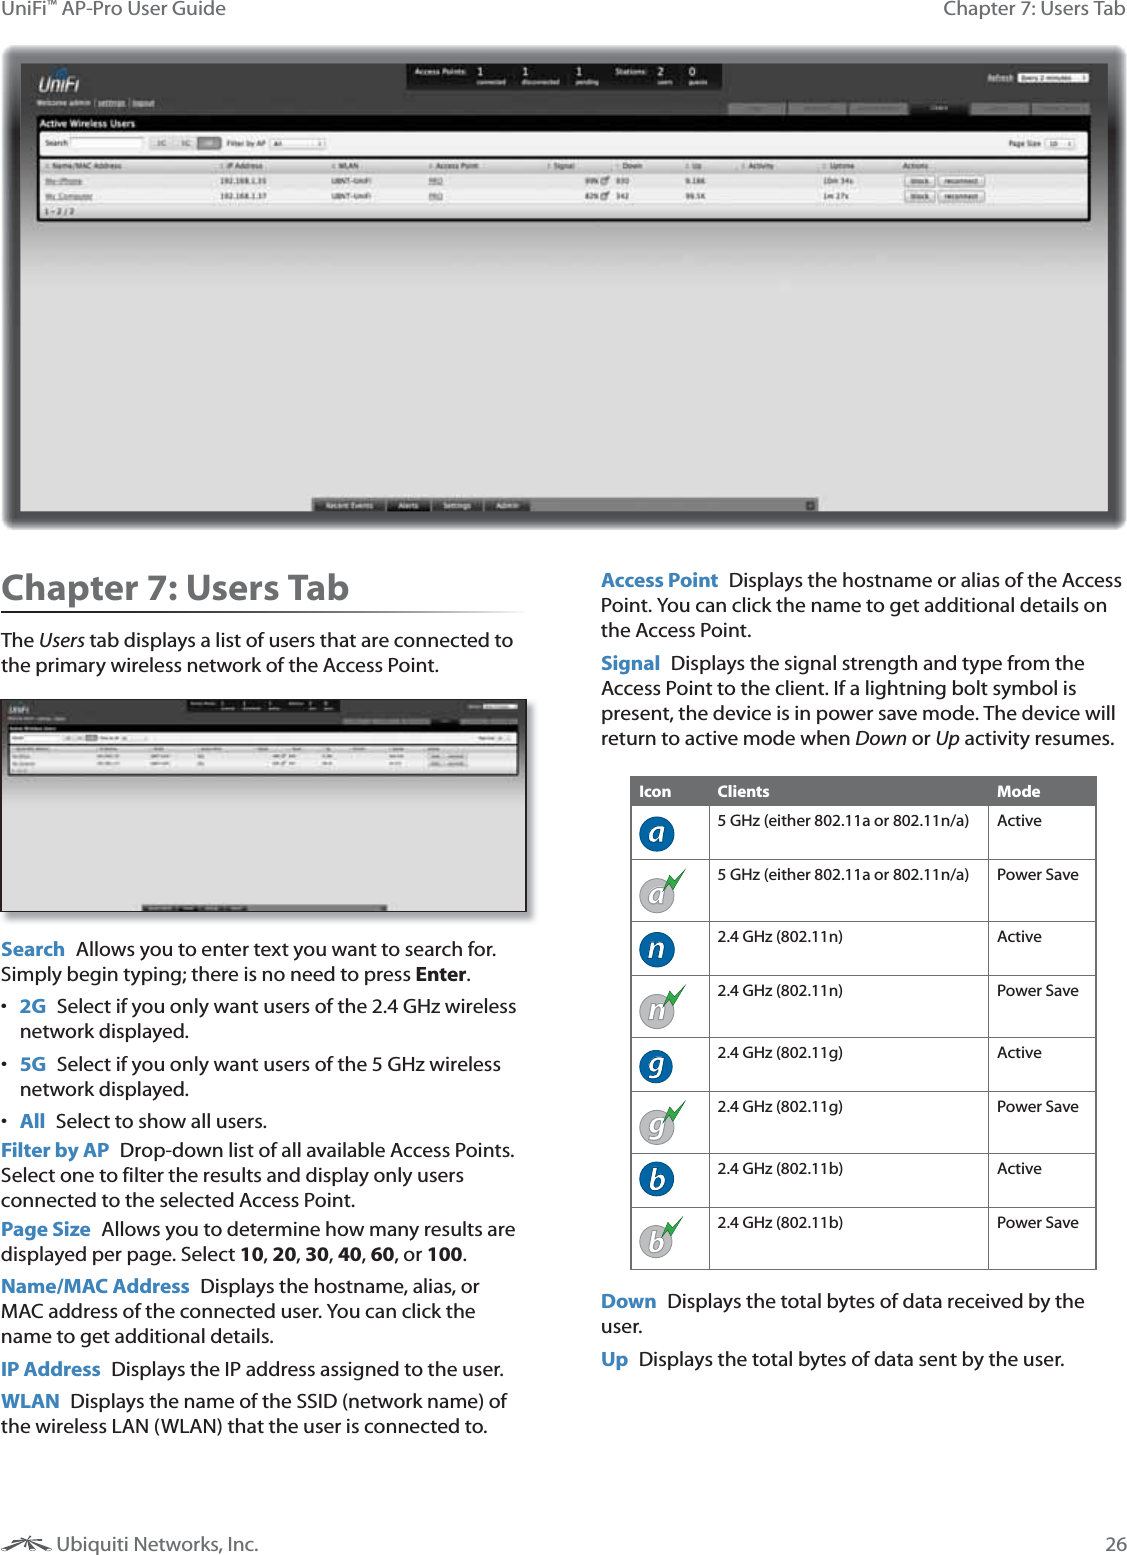 26Chapter 7: Users TabUniFi™ AP-Pro User Guide Ubiquiti Networks, Inc.Chapter 7: Users TabThe Users tab displays a list of users that are connected to the primary wireless network of the Access Point.Search  Allows you to enter text you want to search for. Simply begin typing; there is no need to press Enter. 2G Select if you only want users of the 2.4 GHz wireless network displayed. 5G  Select if you only want users of the 5 GHz wireless network displayed. All  Select to show all users.Filter by AP  Drop-down list of all available Access Points. Select one to filter the results and display only users connected to the selected Access Point.Page Size  Allows you to determine how many results are displayed per page. Select 10, 20, 30, 40, 60, or 100. Name/MAC Address  Displays the hostname, alias, or MAC address of the connected user. You can click the name to get additional details.IP Address  Displays the IP address assigned to the user.WLAN  Displays the name of the SSID (network name) of the wireless LAN (WLAN) that the user is connected to.Access Point  Displays the hostname or alias of the Access Point. You can click the name to get additional details on the Access Point.Signal  Displays the signal strength and type from the Access Point to the client. If a lightning bolt symbol is present, the device is in power save mode. The device will return to active mode when Down or Up activity resumes.Icon Clients Modea5 GHz (either 802.11a or 802.11n/a) Activea5 GHz (either 802.11a or 802.11n/a) Power Saven2.4 GHz (802.11n) Activen2.4 GHz (802.11n) Power Saveg2.4 GHz (802.11g) Activeg2.4 GHz (802.11g) Power Saveb2.4 GHz (802.11b) Activeb2.4 GHz (802.11b) Power SaveDown  Displays the total bytes of data received by the user.Up  Displays the total bytes of data sent by the user.